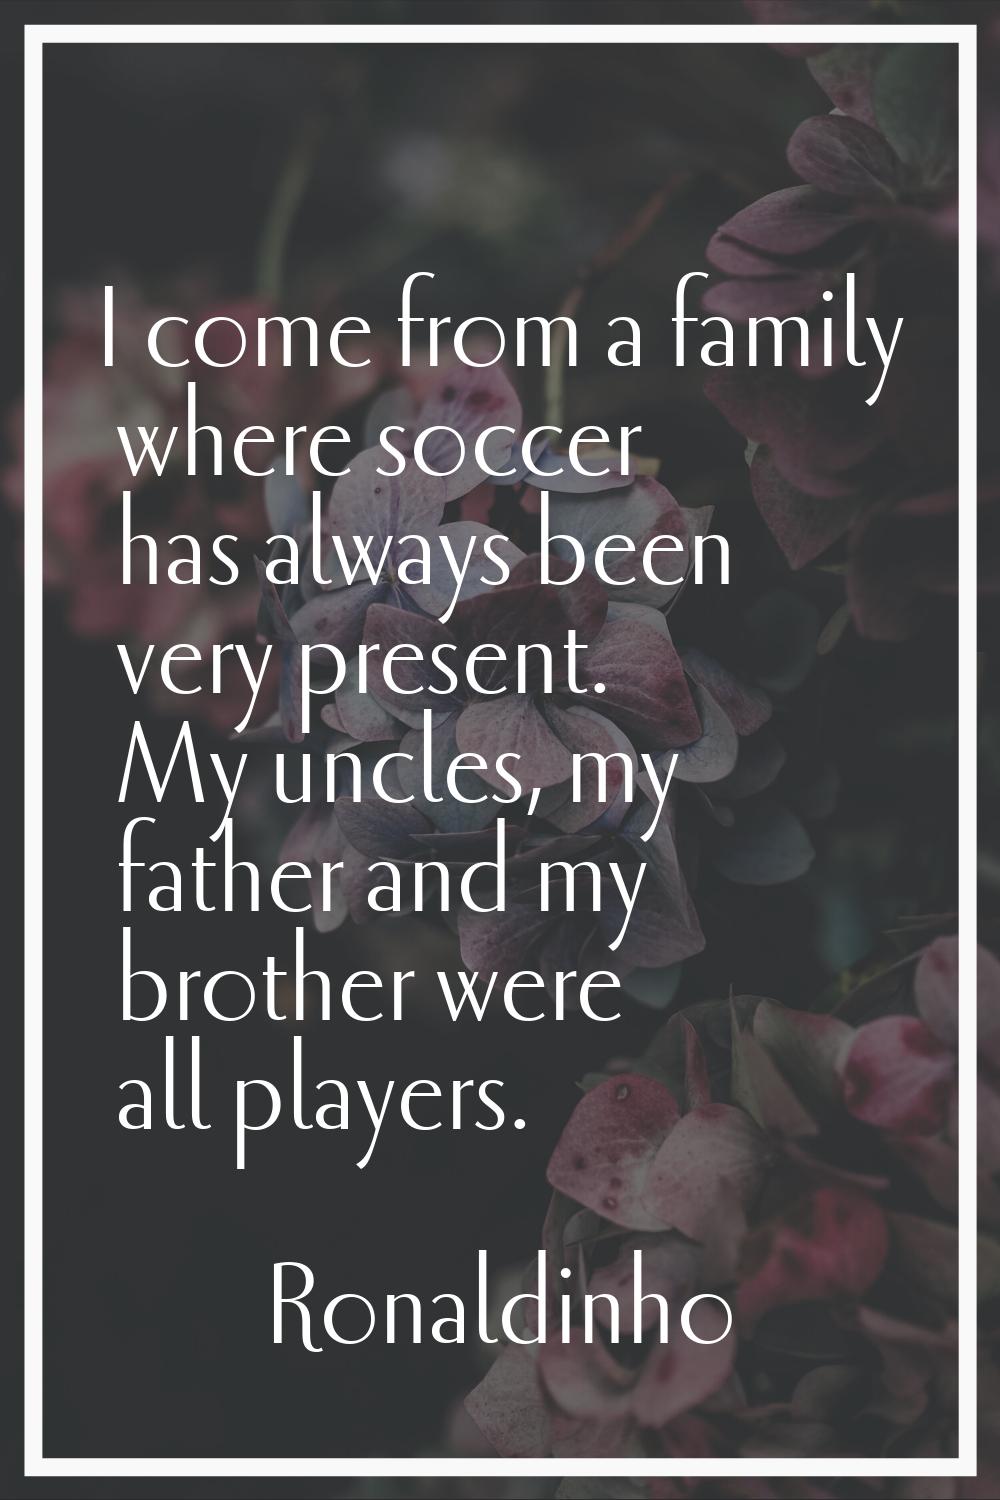 I come from a family where soccer has always been very present. My uncles, my father and my brother